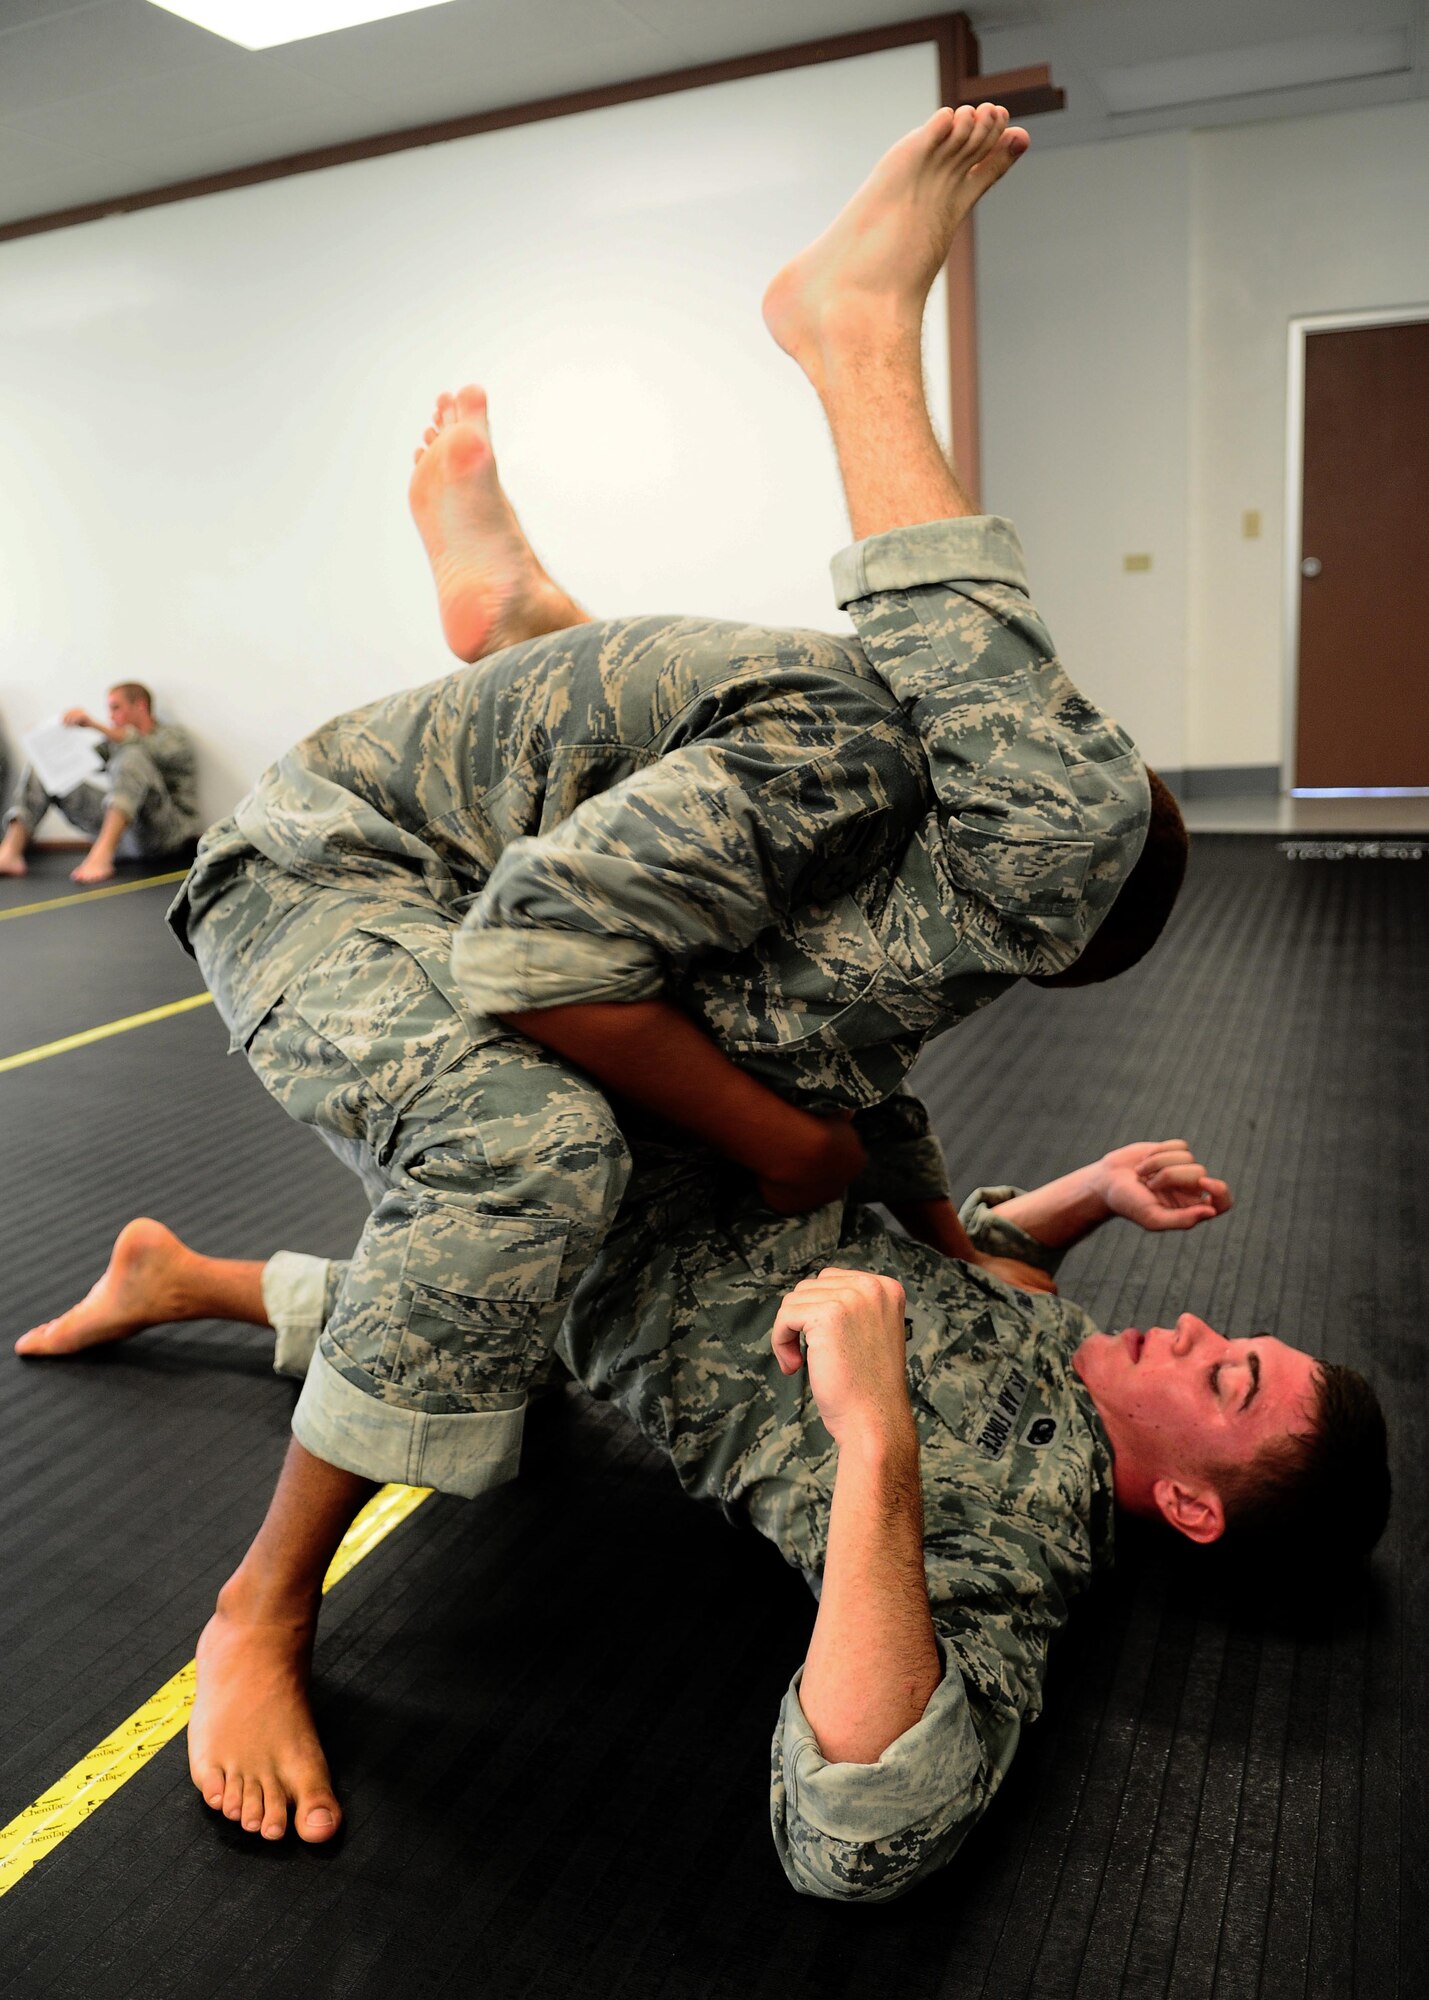 Airmen 1st Class Chris Verble and Darrell Hampton from the 736th Security Forces Squadron practice a submission technique during an Army Modern Combatives class hosted by the Guam Army National Guard at Fort Juan Muna, Oct. 20. The Airmen learned various styles of combative techniques including Jujitsu and grappling. (U.S. Air Force/Airman Jeffrey Schultze/Released)